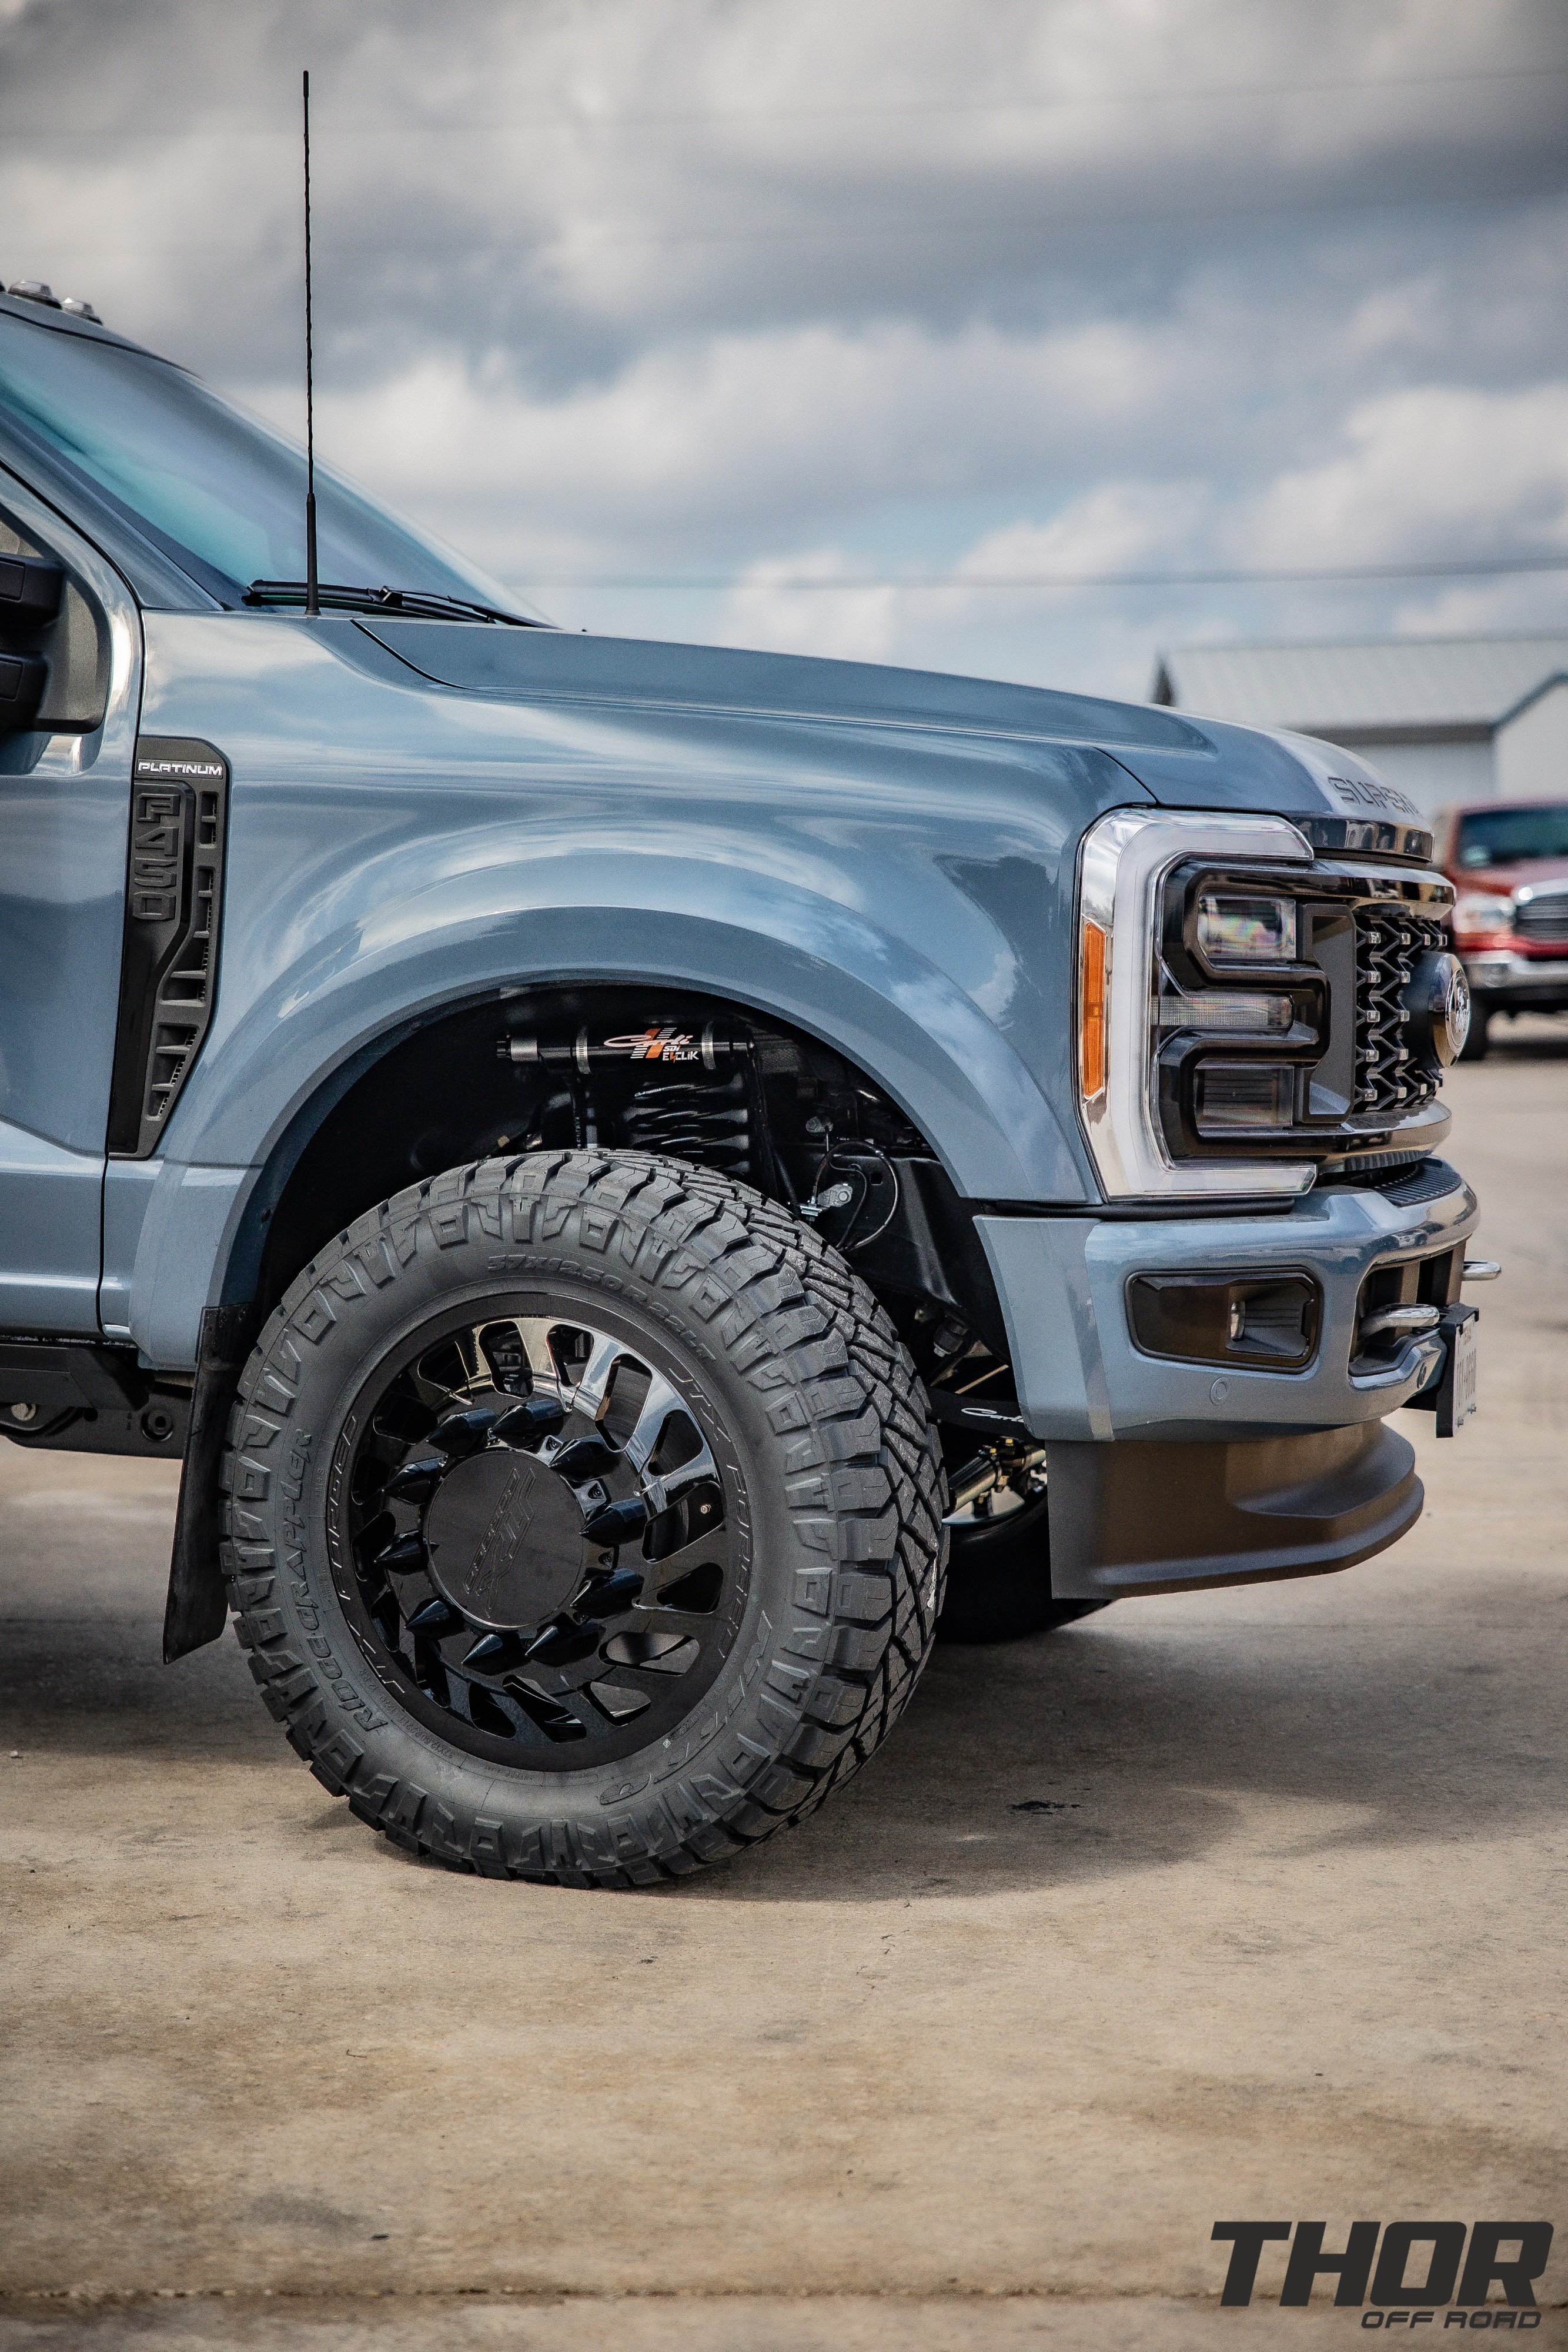 2023 Ford F-450 Super Duty Platinum in Blue with Carli 3.5" E-Venture System, Carli Full Rear Spring Replacement, Carli Torsion Sway Bar, PMF Steering Stabilizer, Carli 3.5" Fabricated Radius Arms, JTX Centerfire 22x8.25" Wheels, 37x12.50R22 Nitto Ridge Grappler Tires, Retrax Pro XR Bed Cover, Spray in Bed Liner, Train Horn, BW Tow and Stow, Curt Hitch Lock